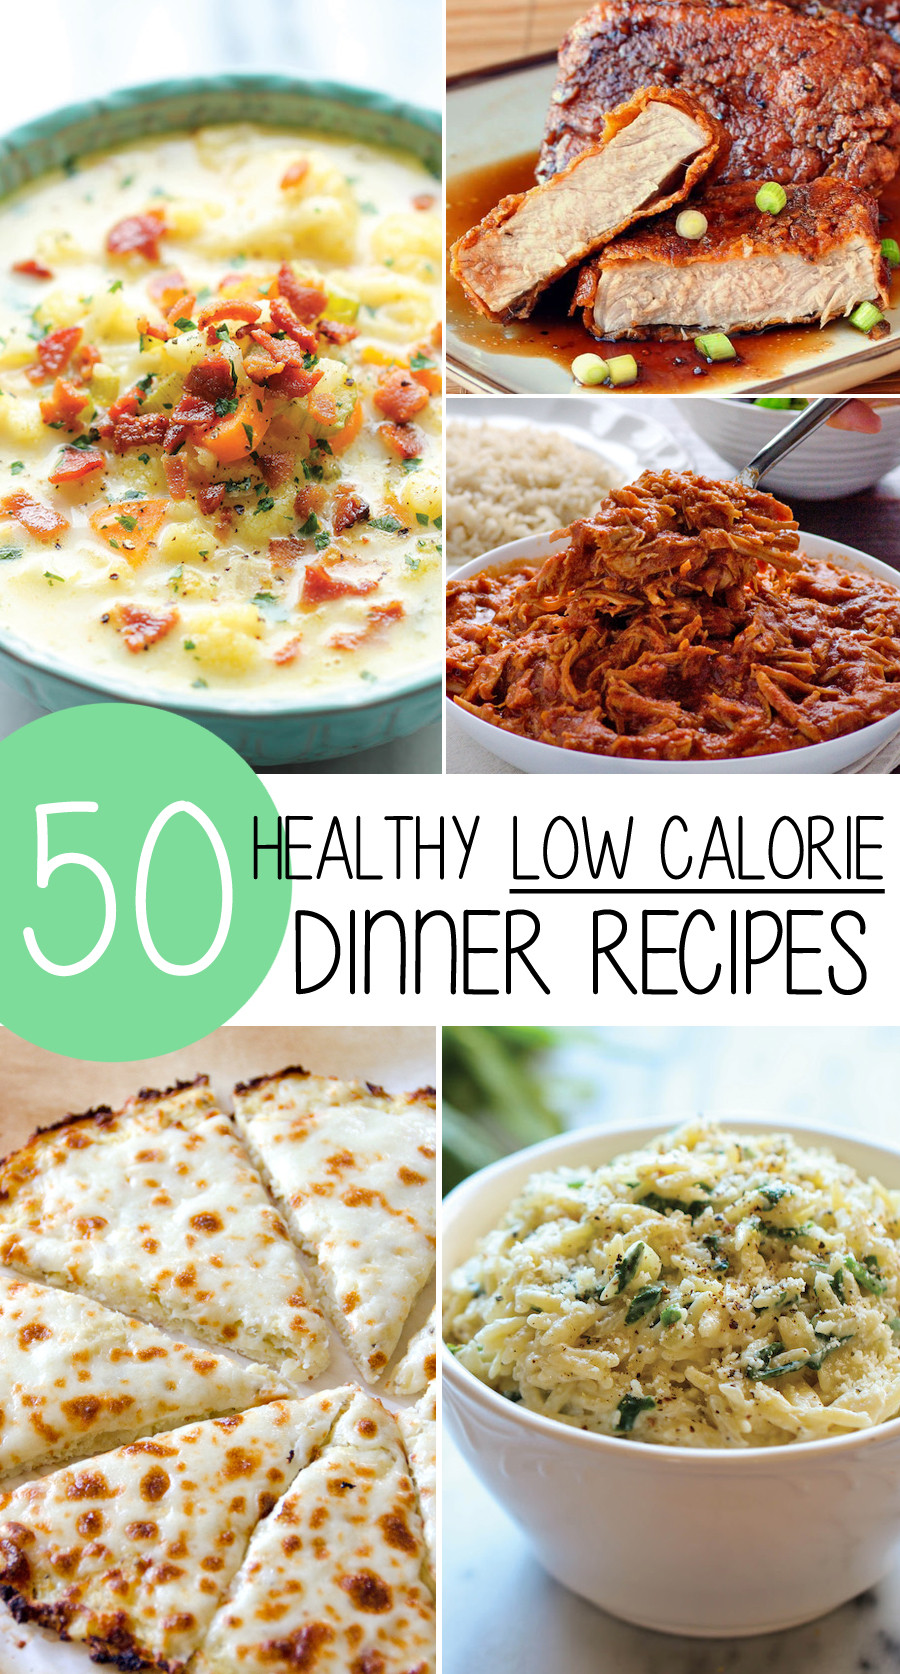 Weight Loss Dinners
 50 Healthy Low Calorie Weight Loss Dinner Recipes